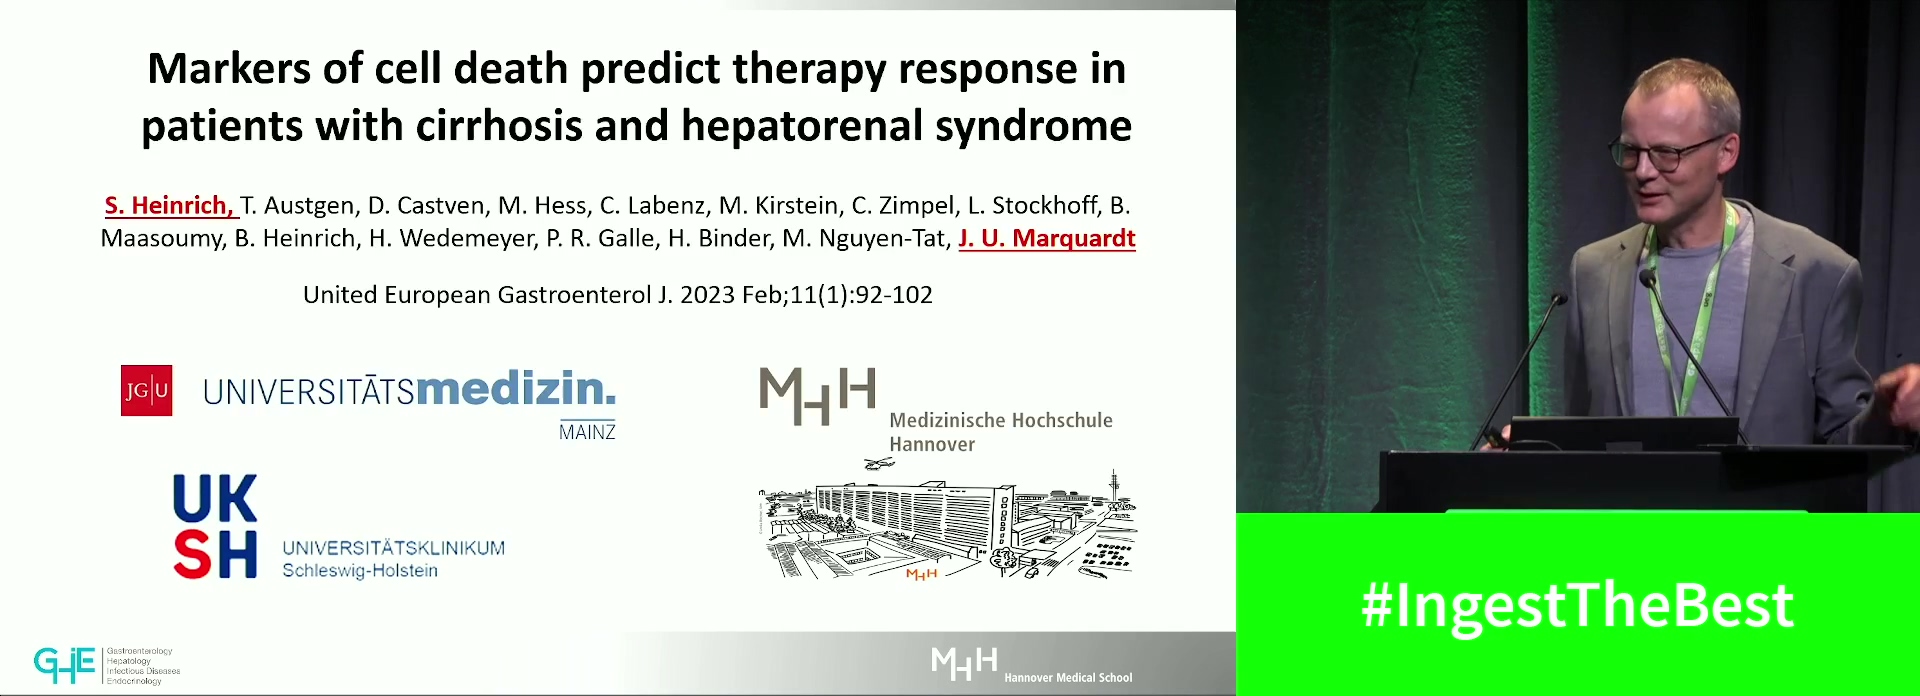 Predictors of treatment response in hepatorenal syndrome